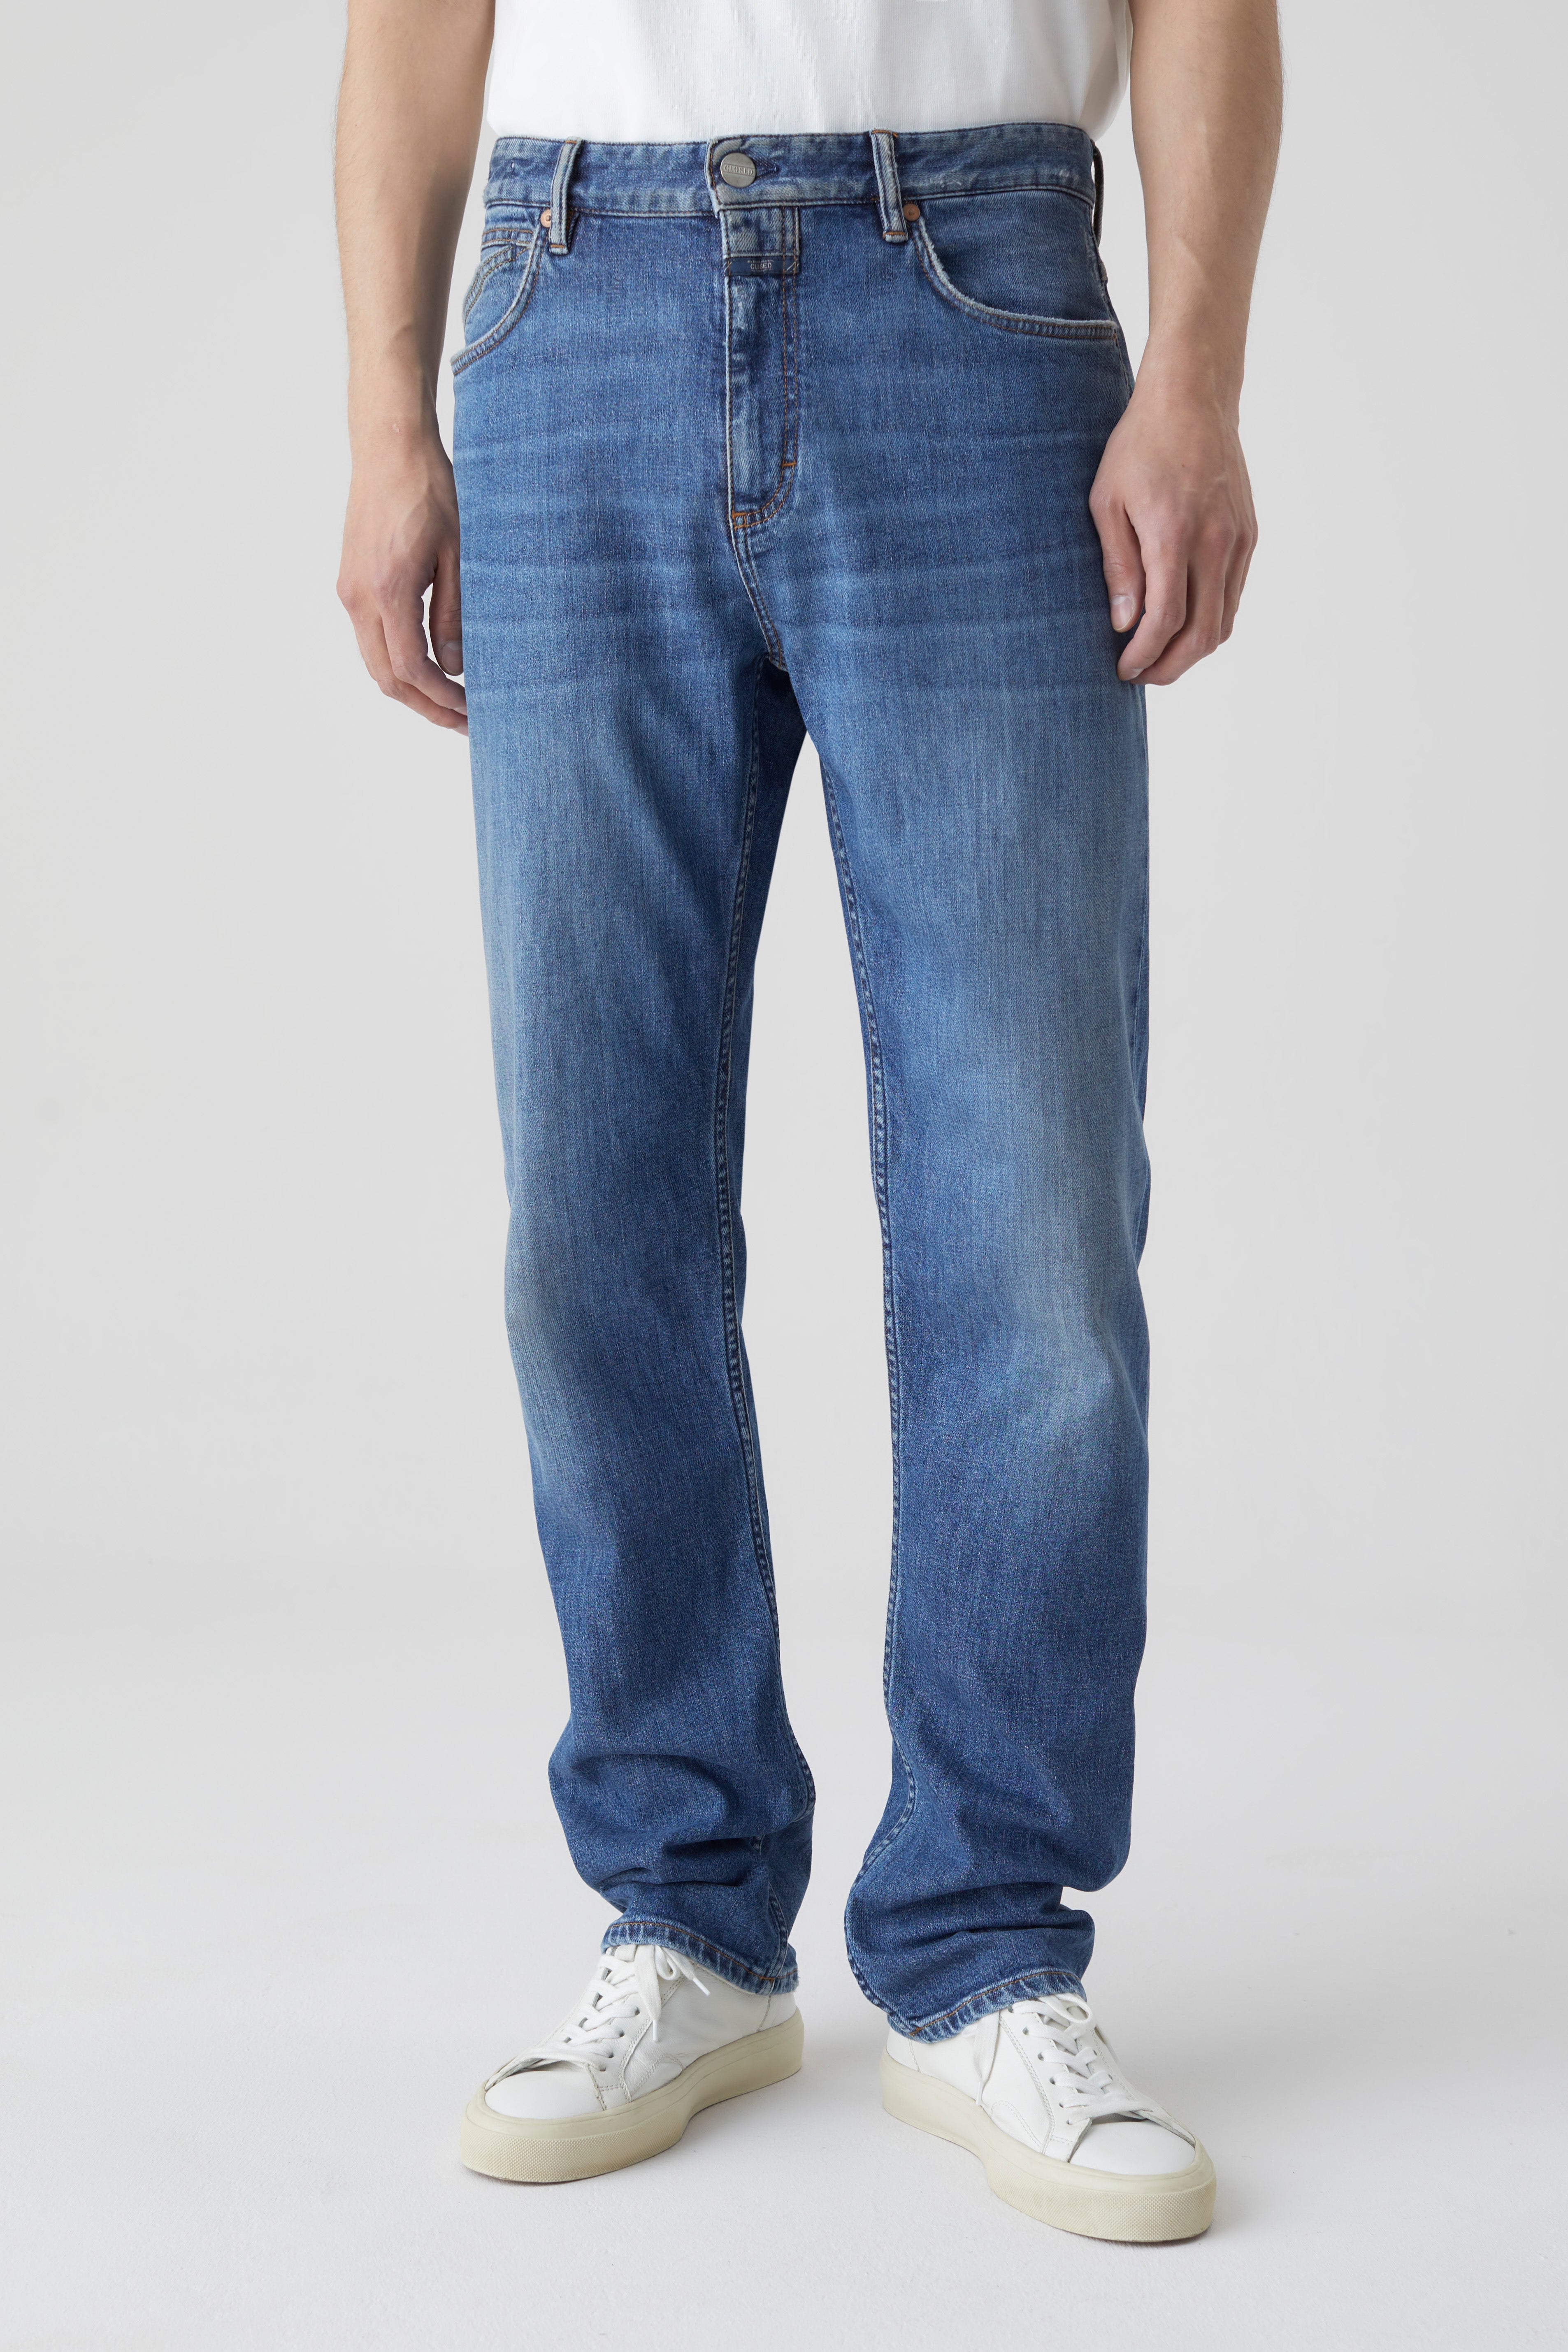 CLOSED-OUTLET-SALE-STYLE-NAME-BOGUS-STRAIGHT-JEANS-Jeans-ARCHIVE-COLLECTION-2.jpg